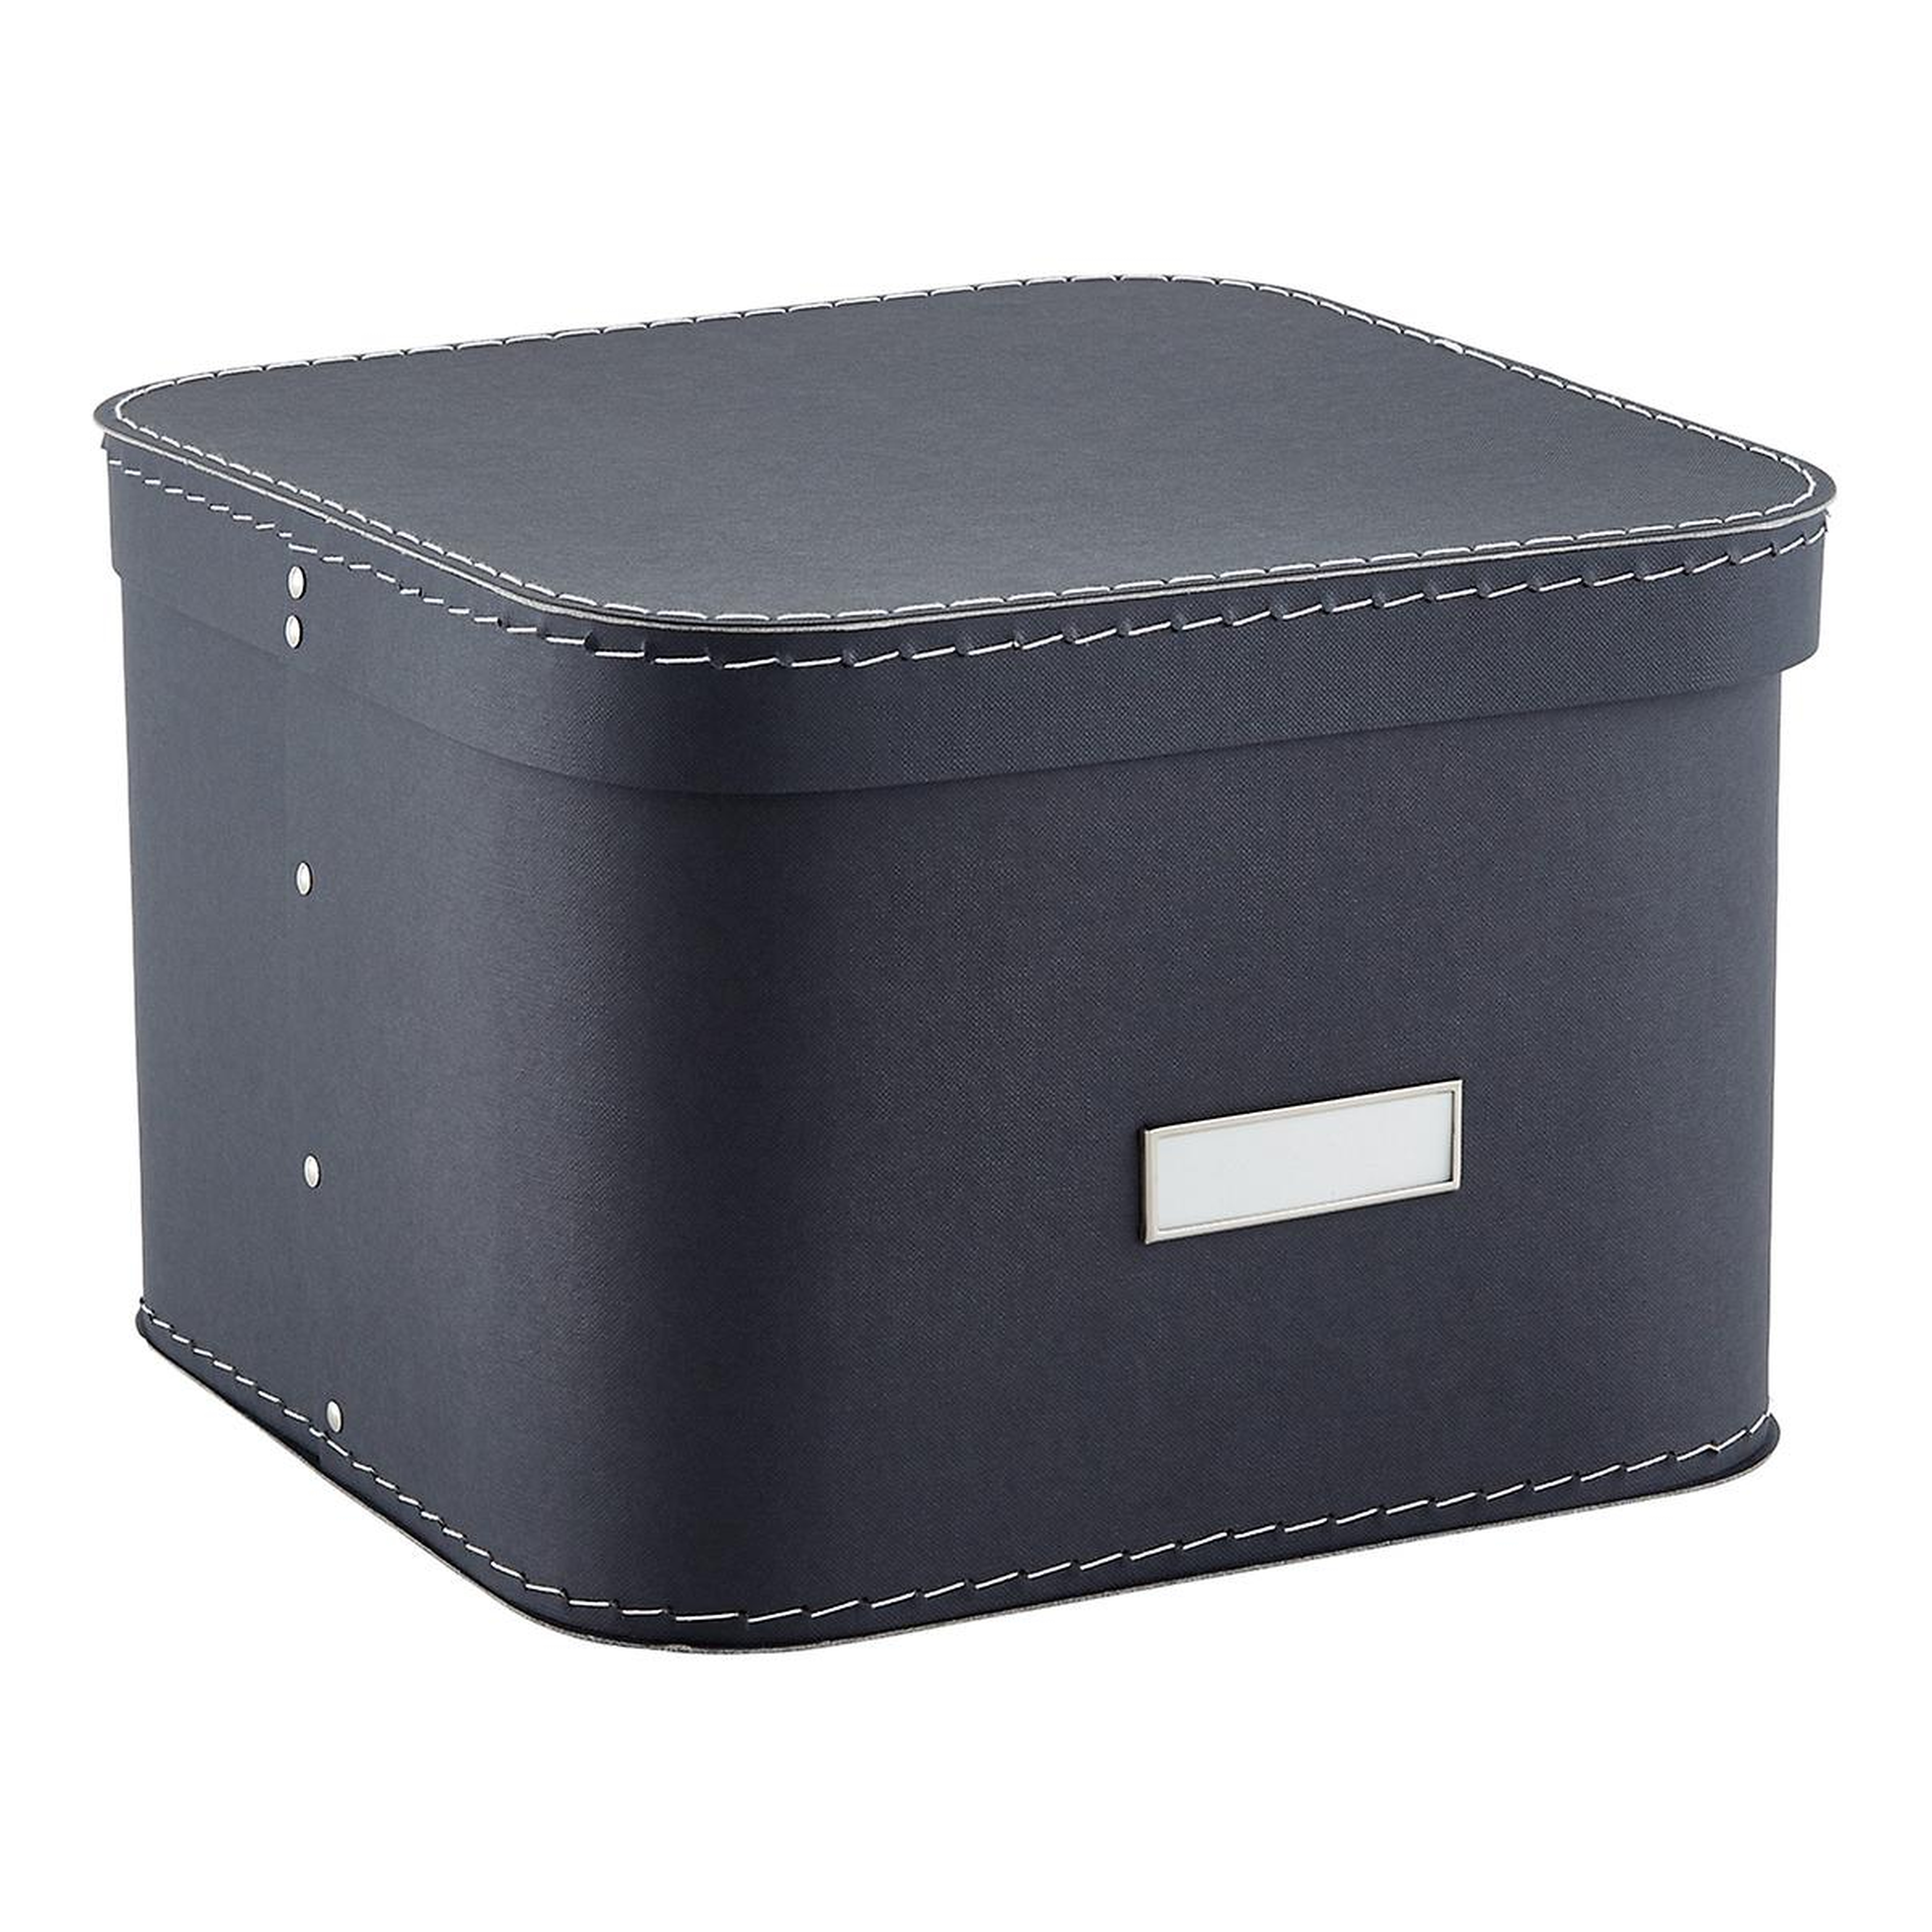 Graphite Oskar Storage Box with Lid - containerstore.com